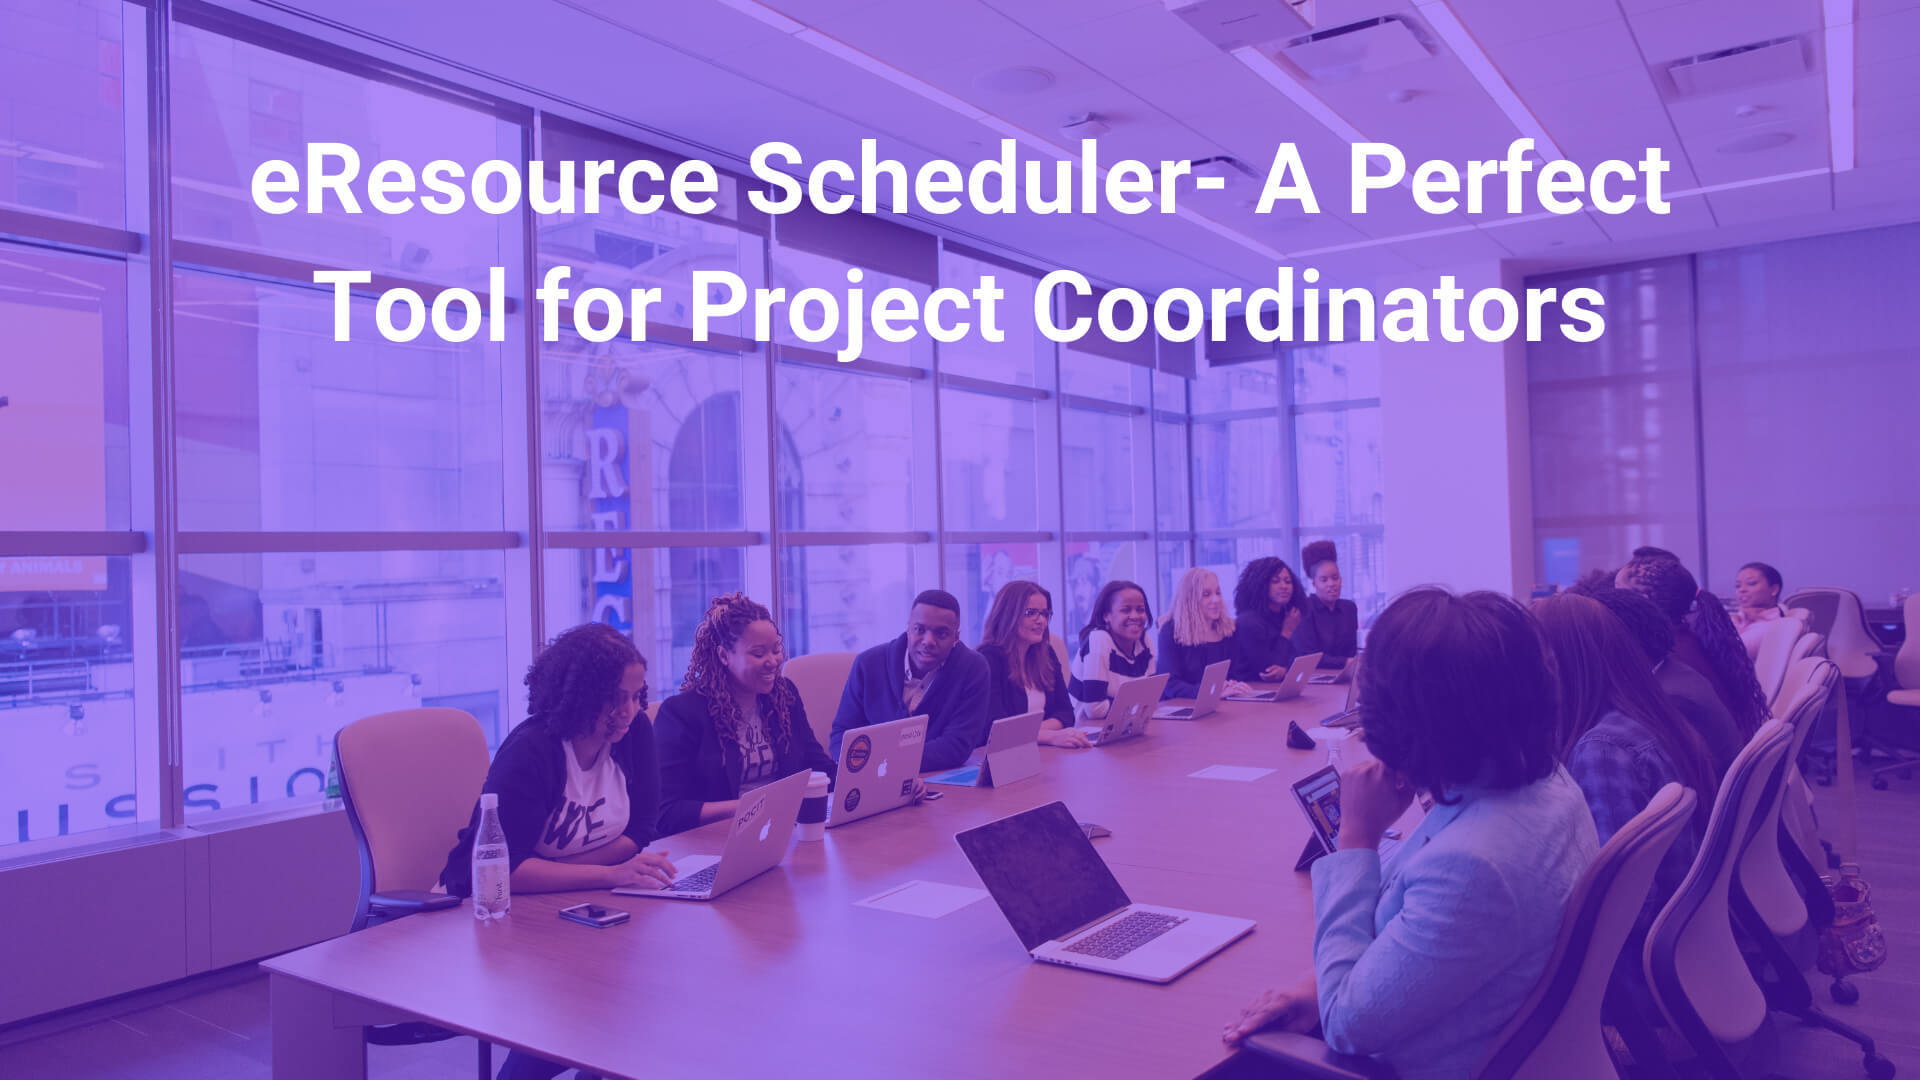 eResource Scheduler- A Perfect Tool for Project Coordinators